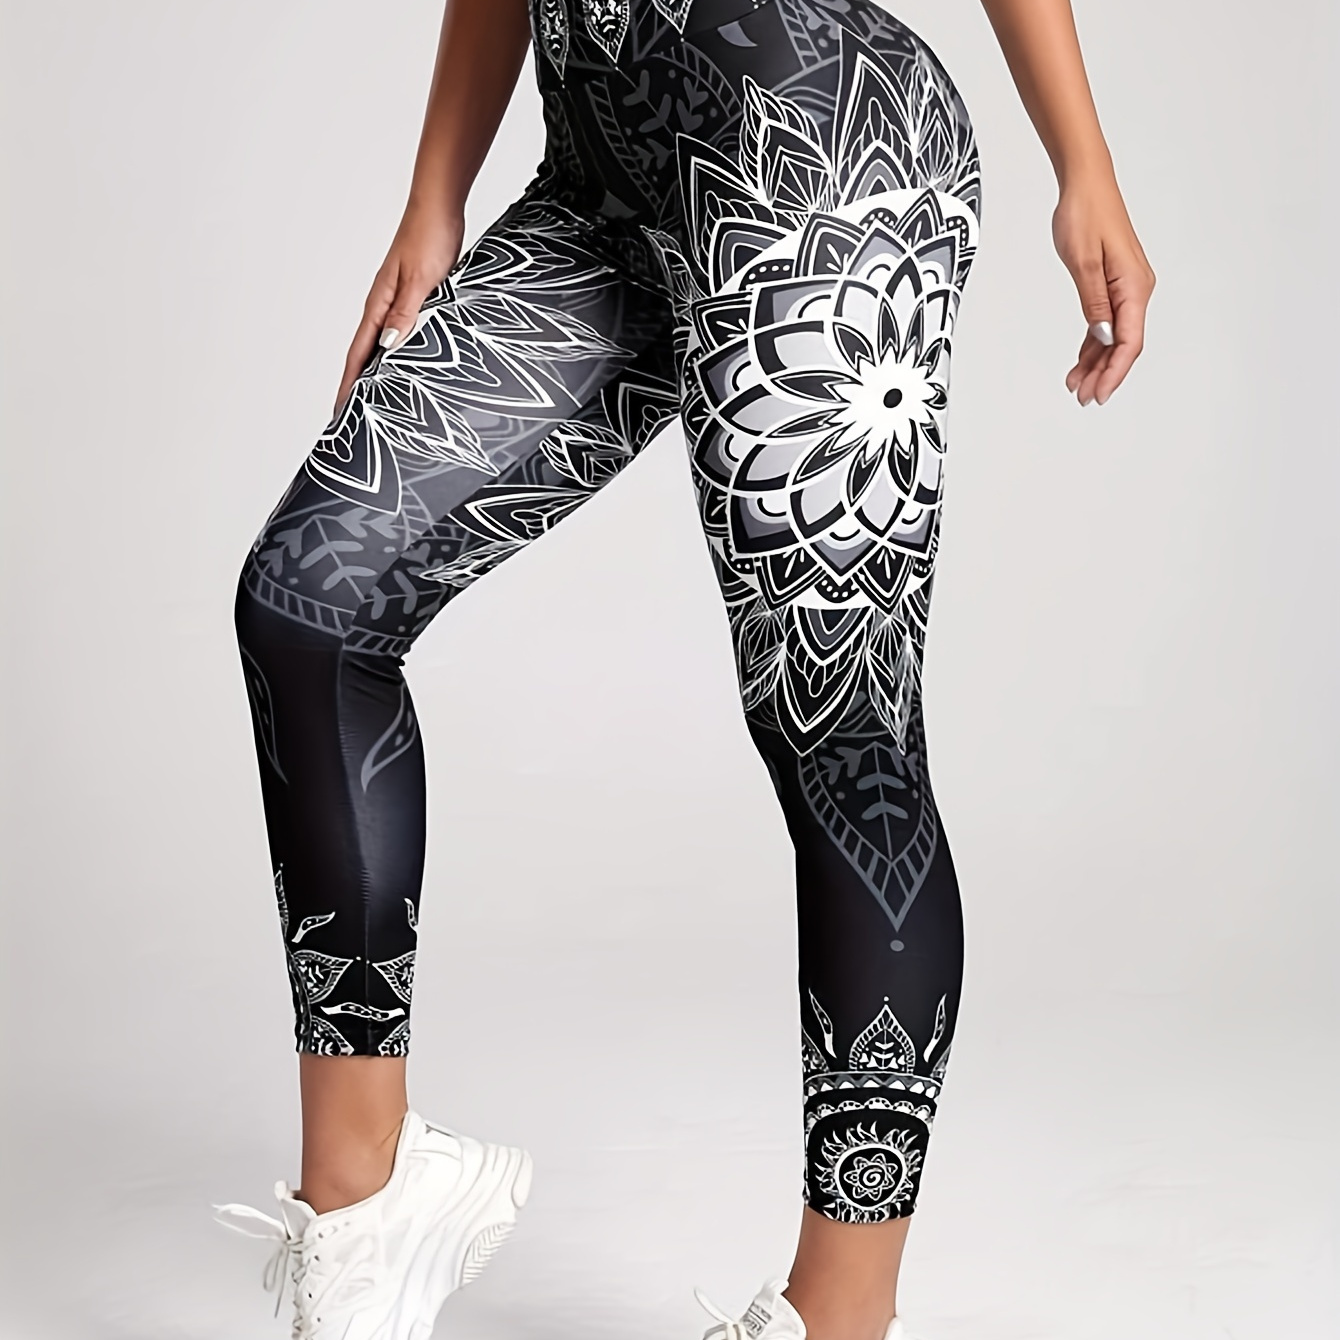 

Women's Printed Yoga Leggings, High-waist Tummy Control, Breathable Fitness Tights, Athletic Running Activewear For Fall & Winter